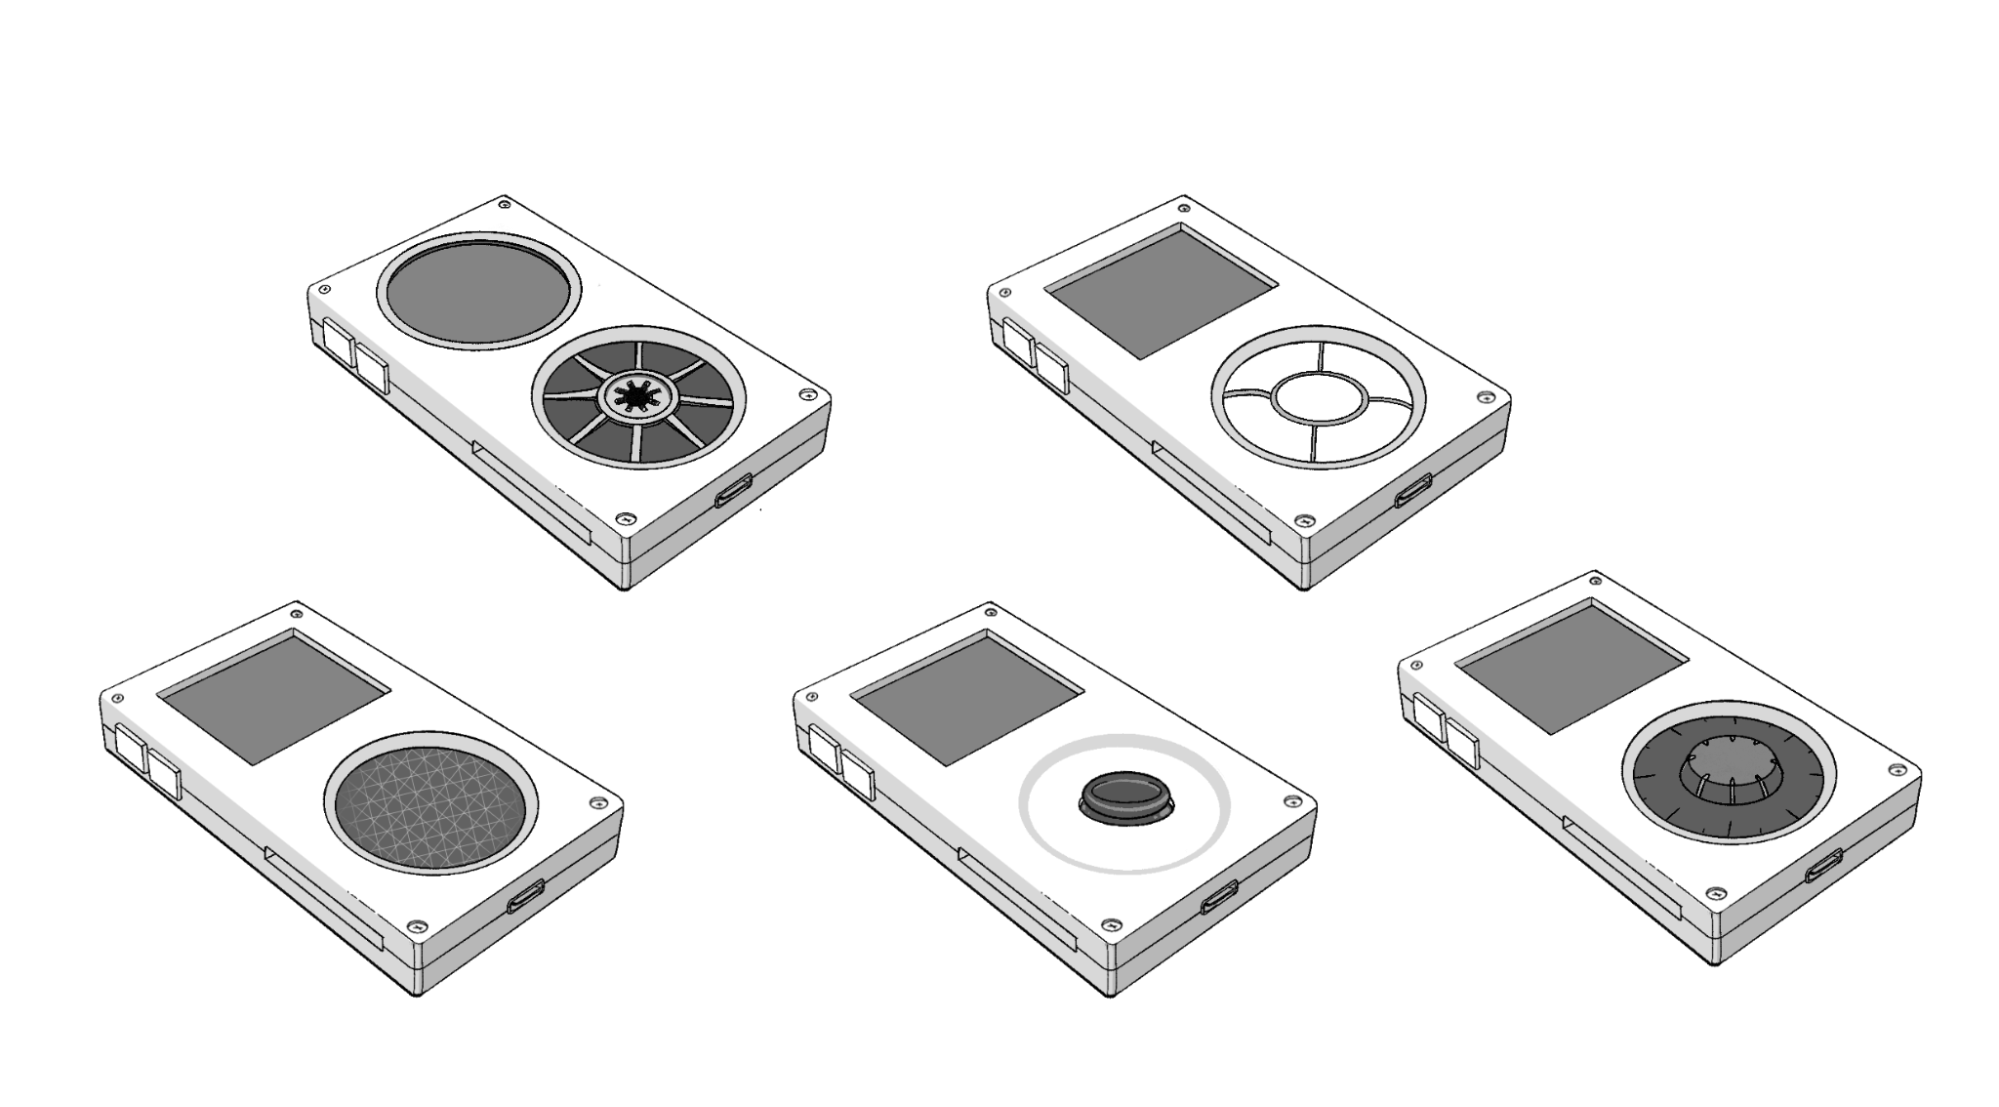 5 different concept sketches of various input hardware ideas. A cassette-inspired reel, directional buttons around a middle button, a circular trackpad, an analog joystick, and a rotary encoder